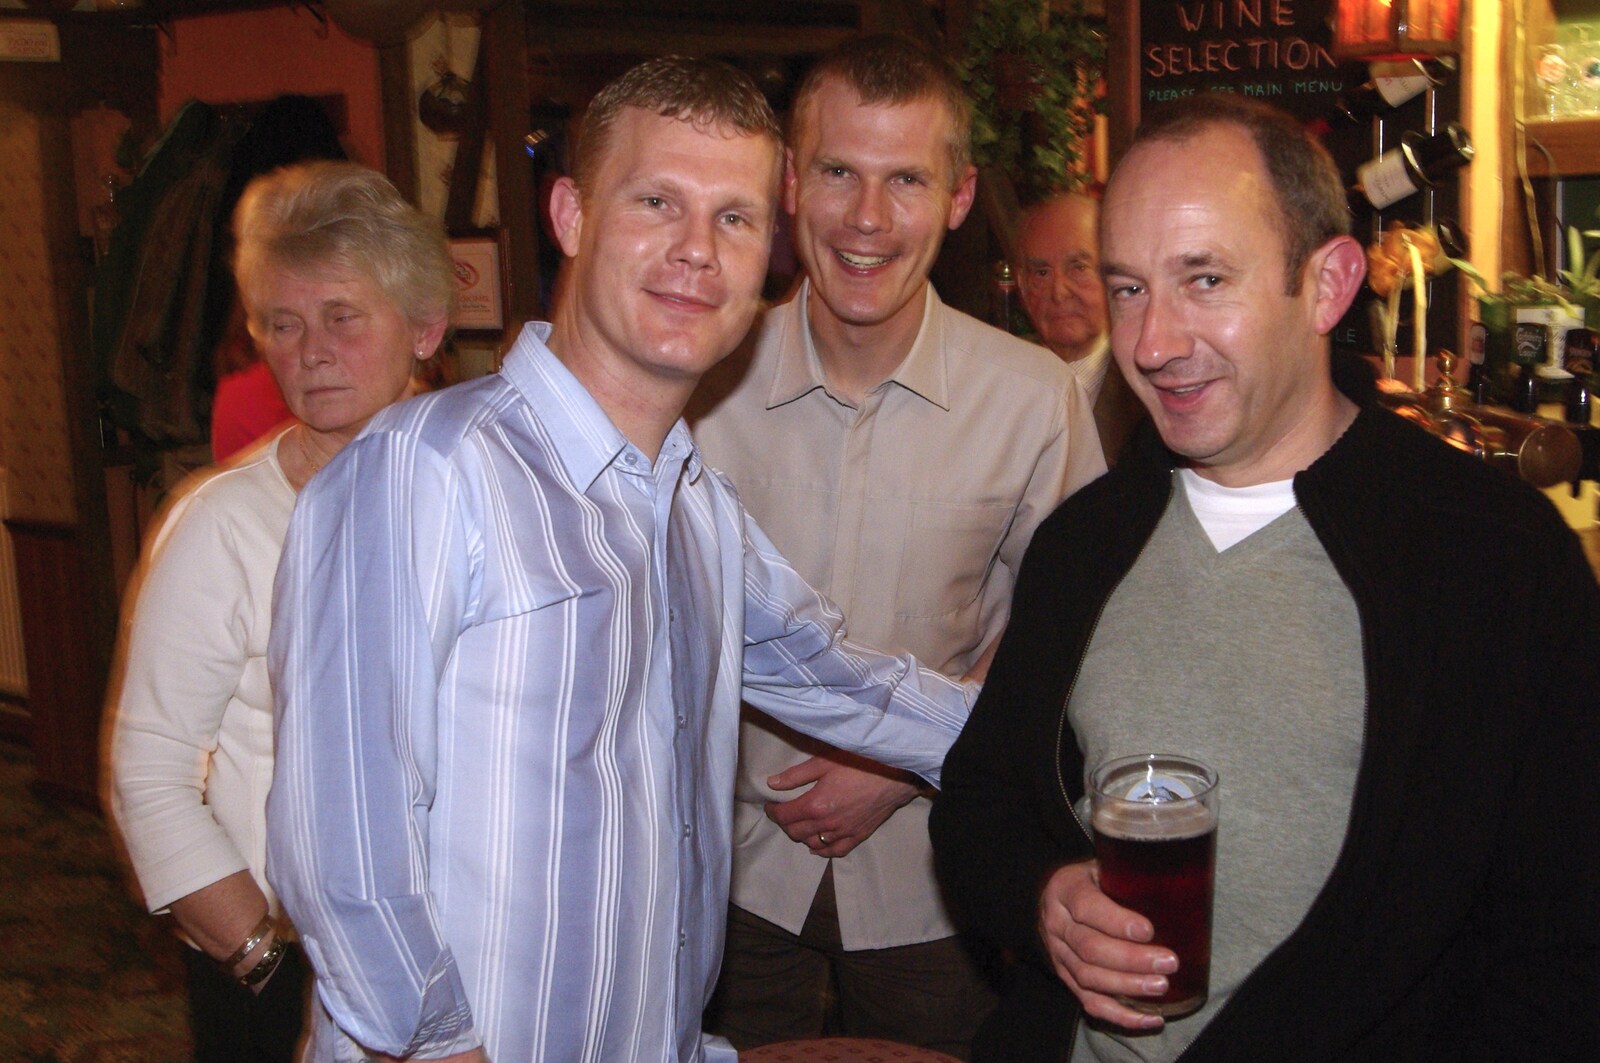 Mikey, Andy and DH from The Swan's 25th Anniversary, Brome, Suffolk - 14th November 2008